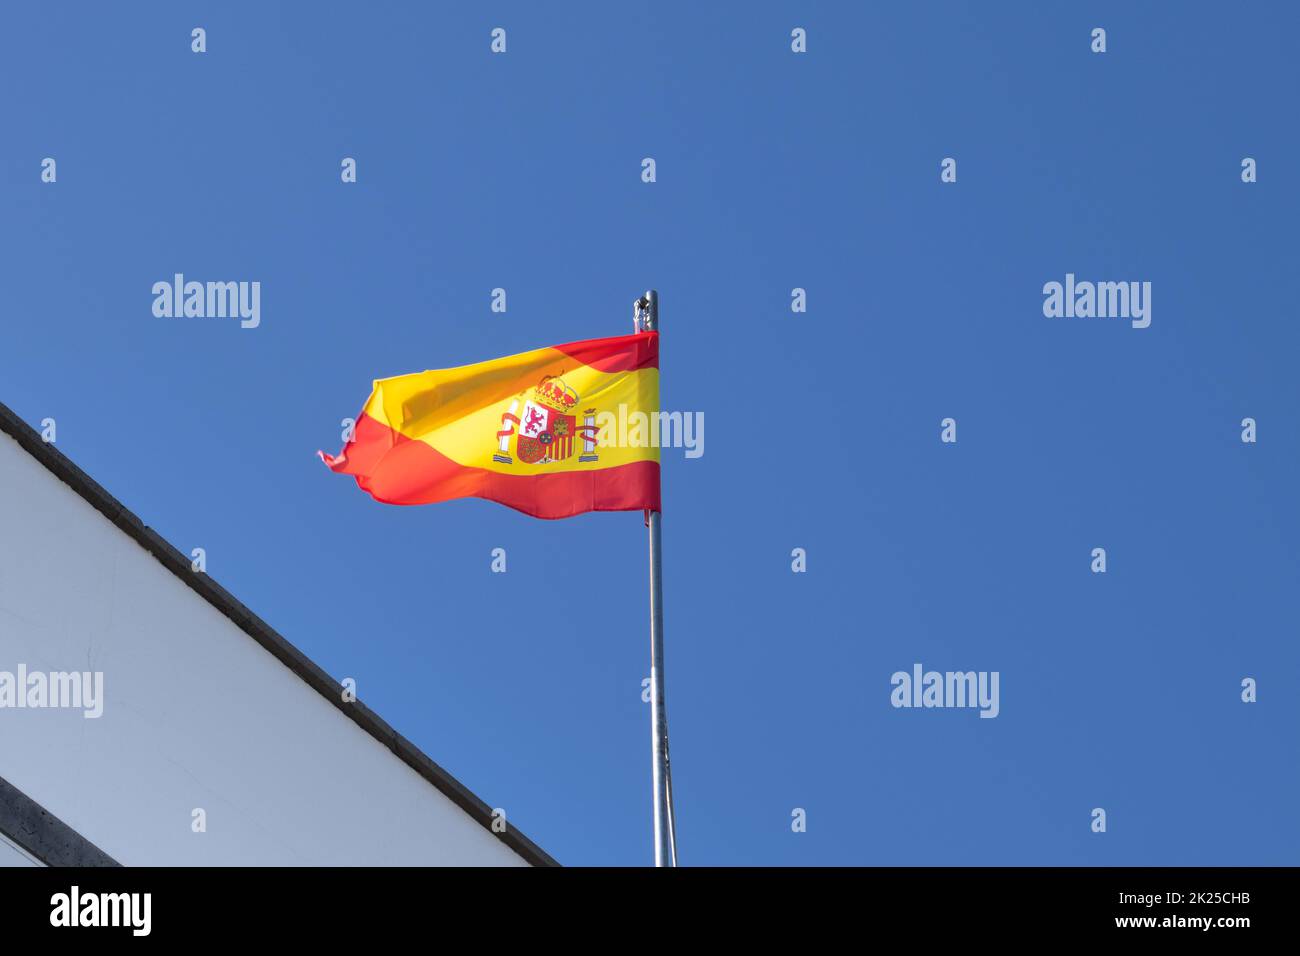 Triangle of a roof of a building and a pole with spanish flag, blowing in the wind. Bright blue sky. Arrecife, Lanzarote, Canary Islands, Spain. Stock Photo